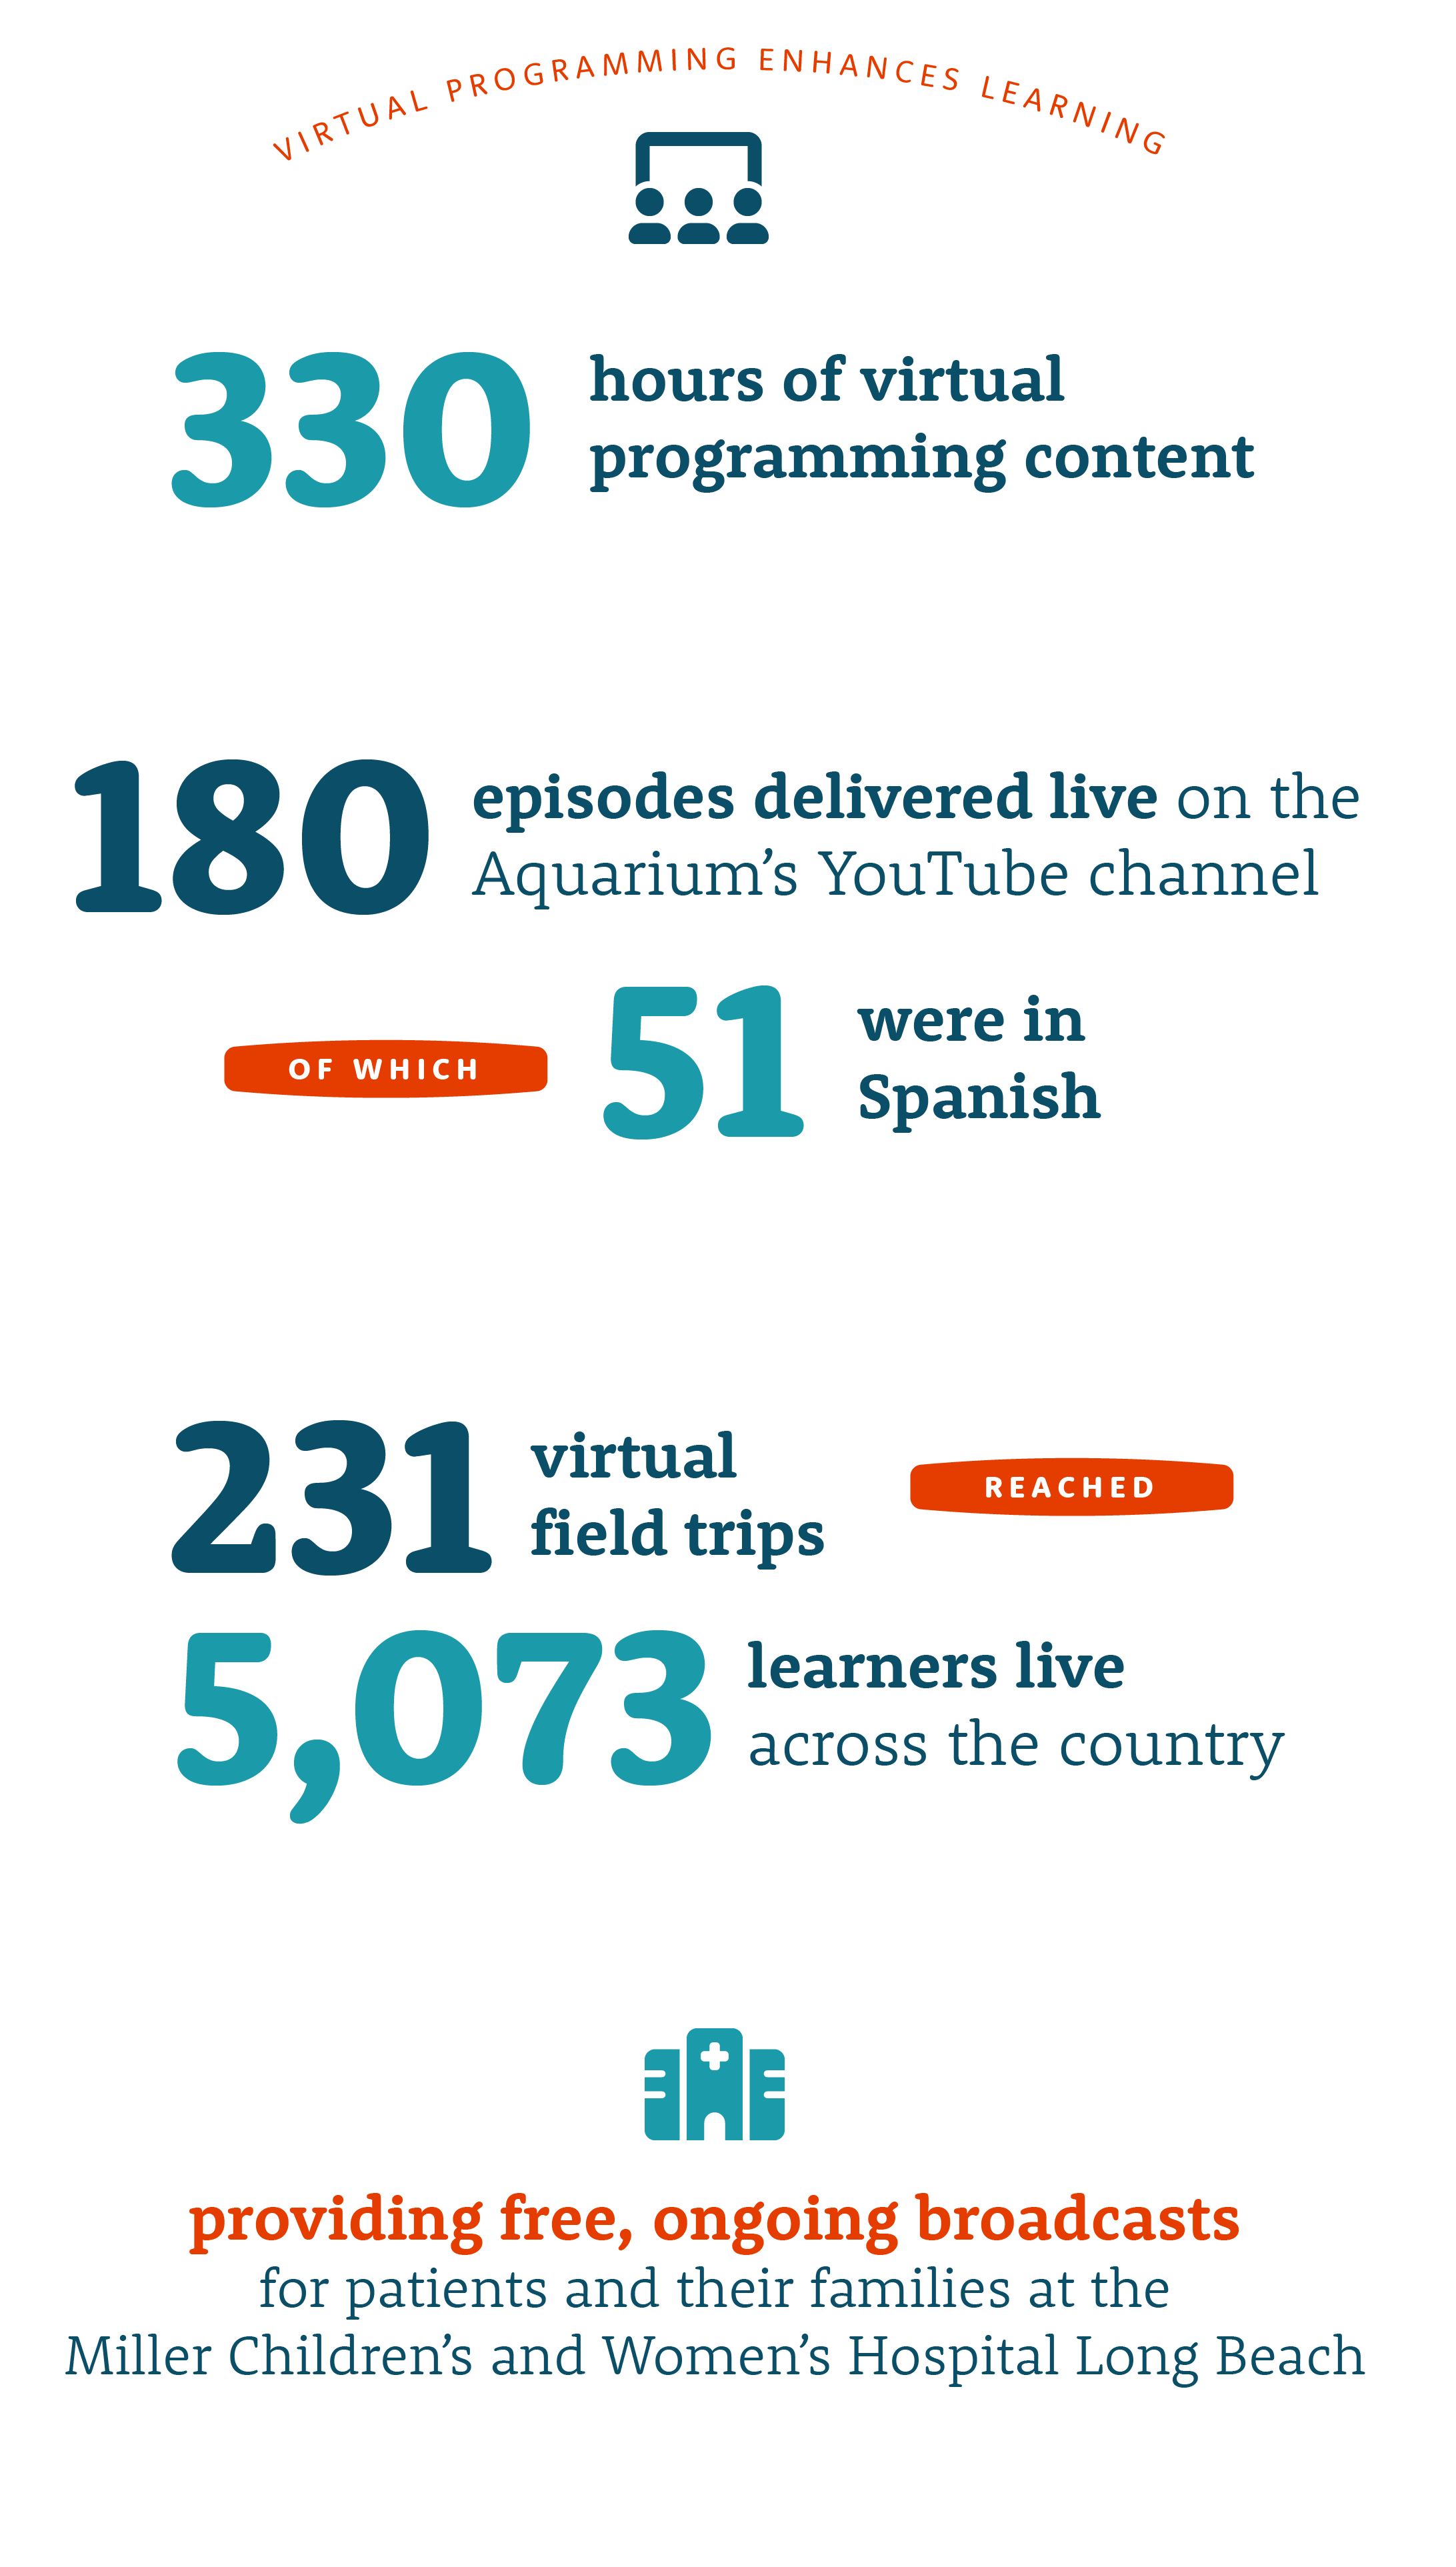 Virtual programming enhances learning infographic - 330 hours of virtual programming content - 180 episodes delivered live on the Aquarium's YouTube Channel of which 51 were in Spanish - 231 virtual field trips reached - 5,073 learners live across the country - Providing free, ongoing broadcasts for patients and their families at the Miller Children's and Women's Hospital Long Beach.